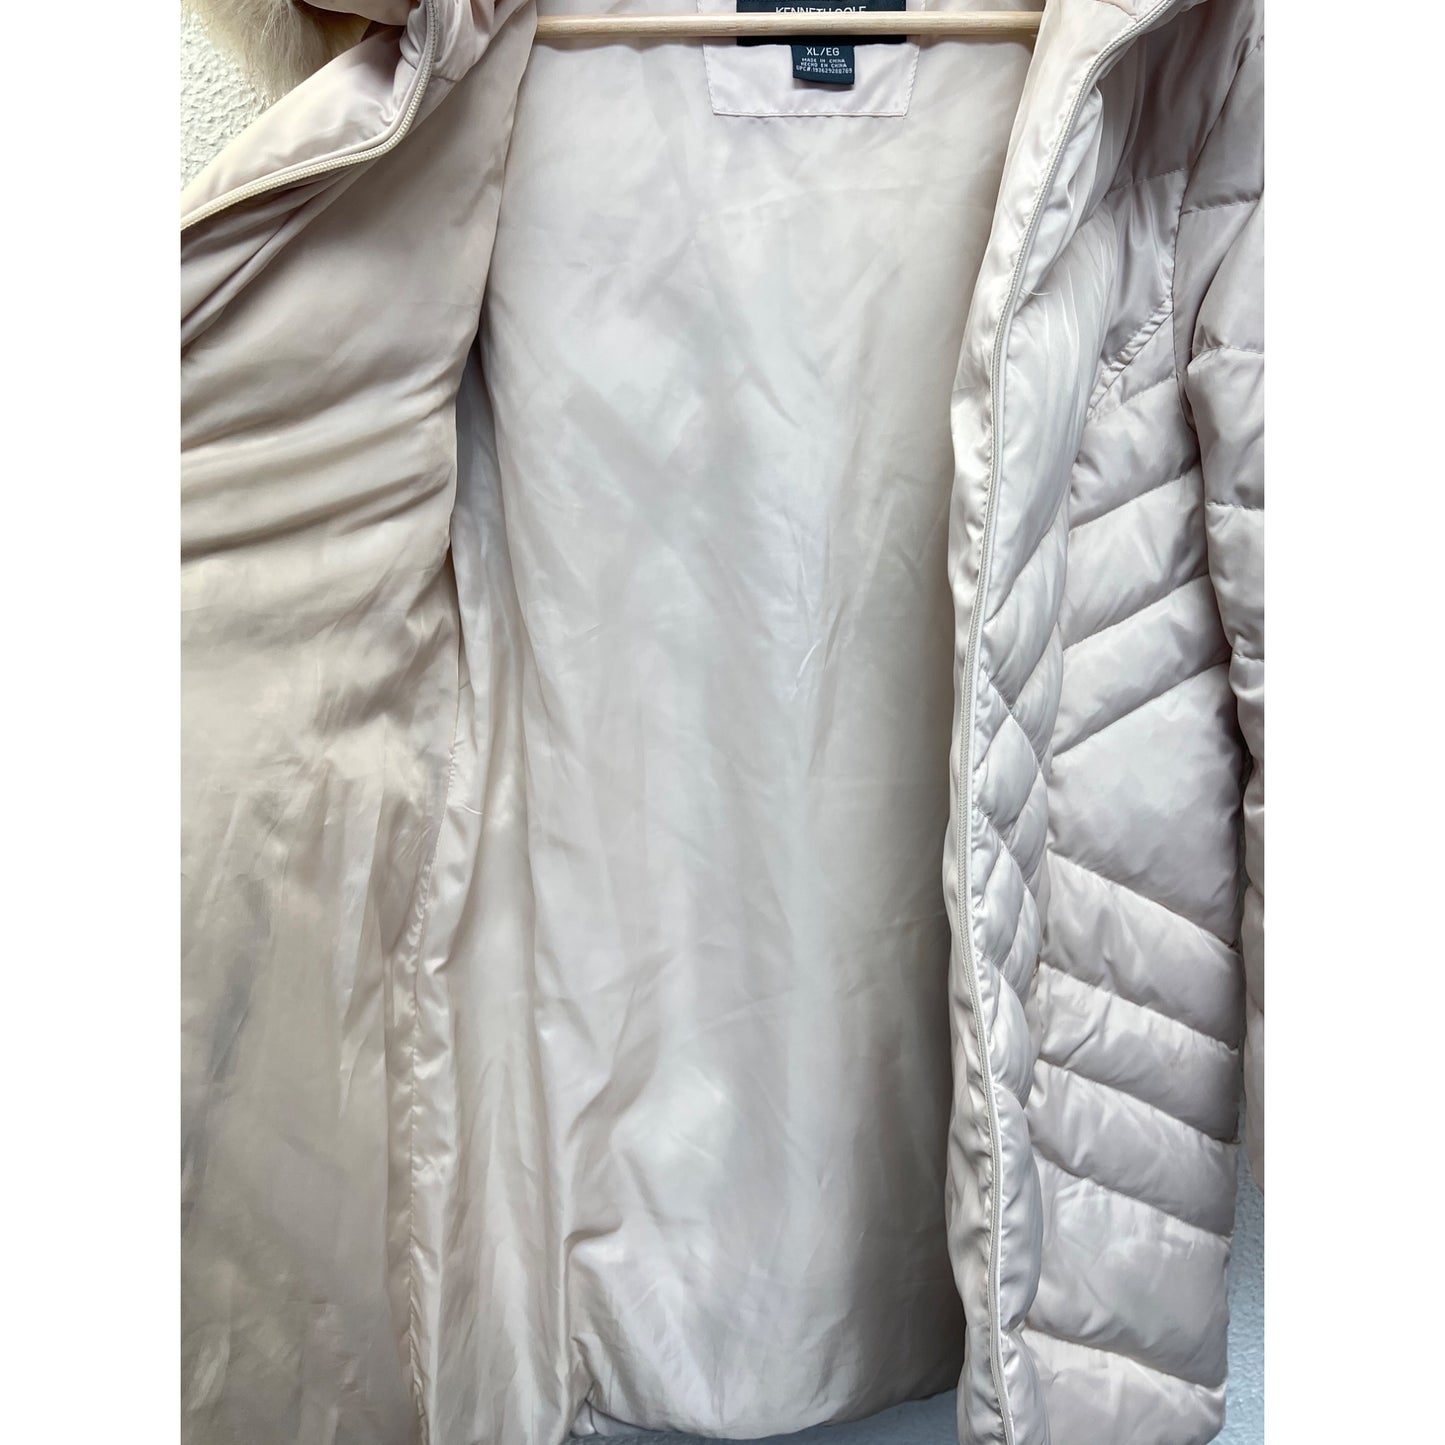 Kenneth Cole Reaction Long White Down Puffer Hoodie Coat